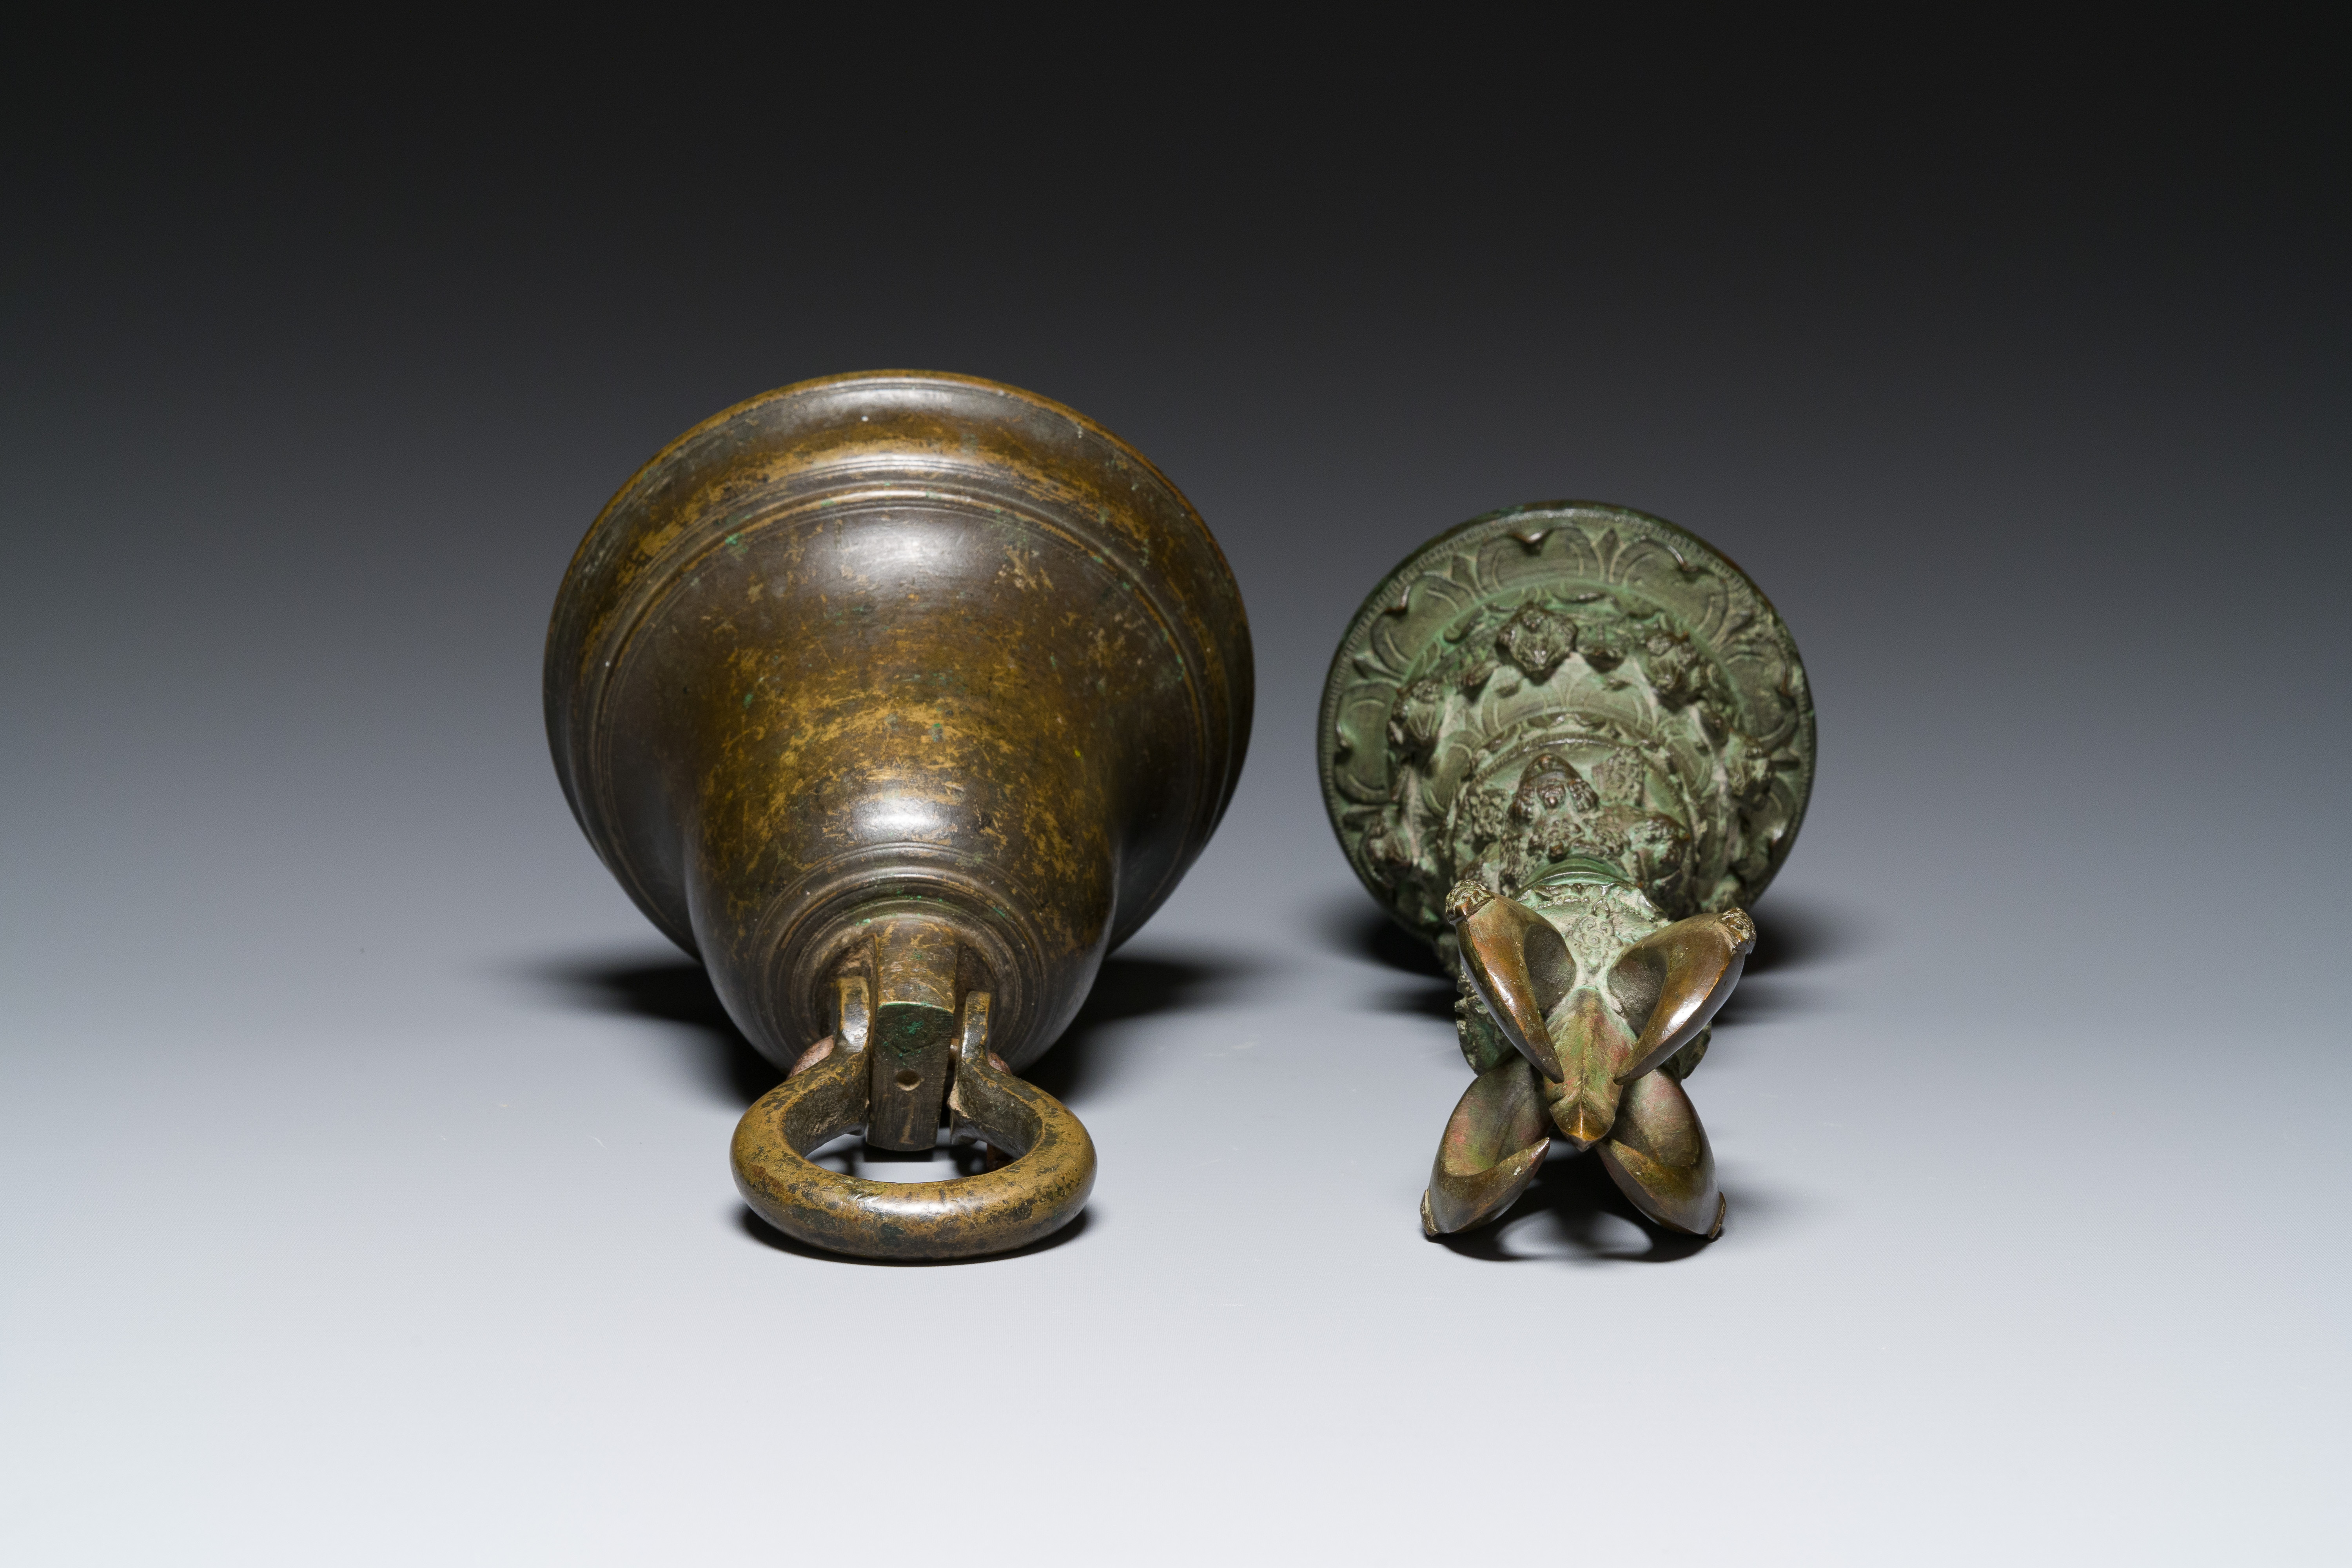 A bronze bell and a ceremonial hand bell, South Asia and Southeast Asia, 19th C. or earlier - Image 17 of 21